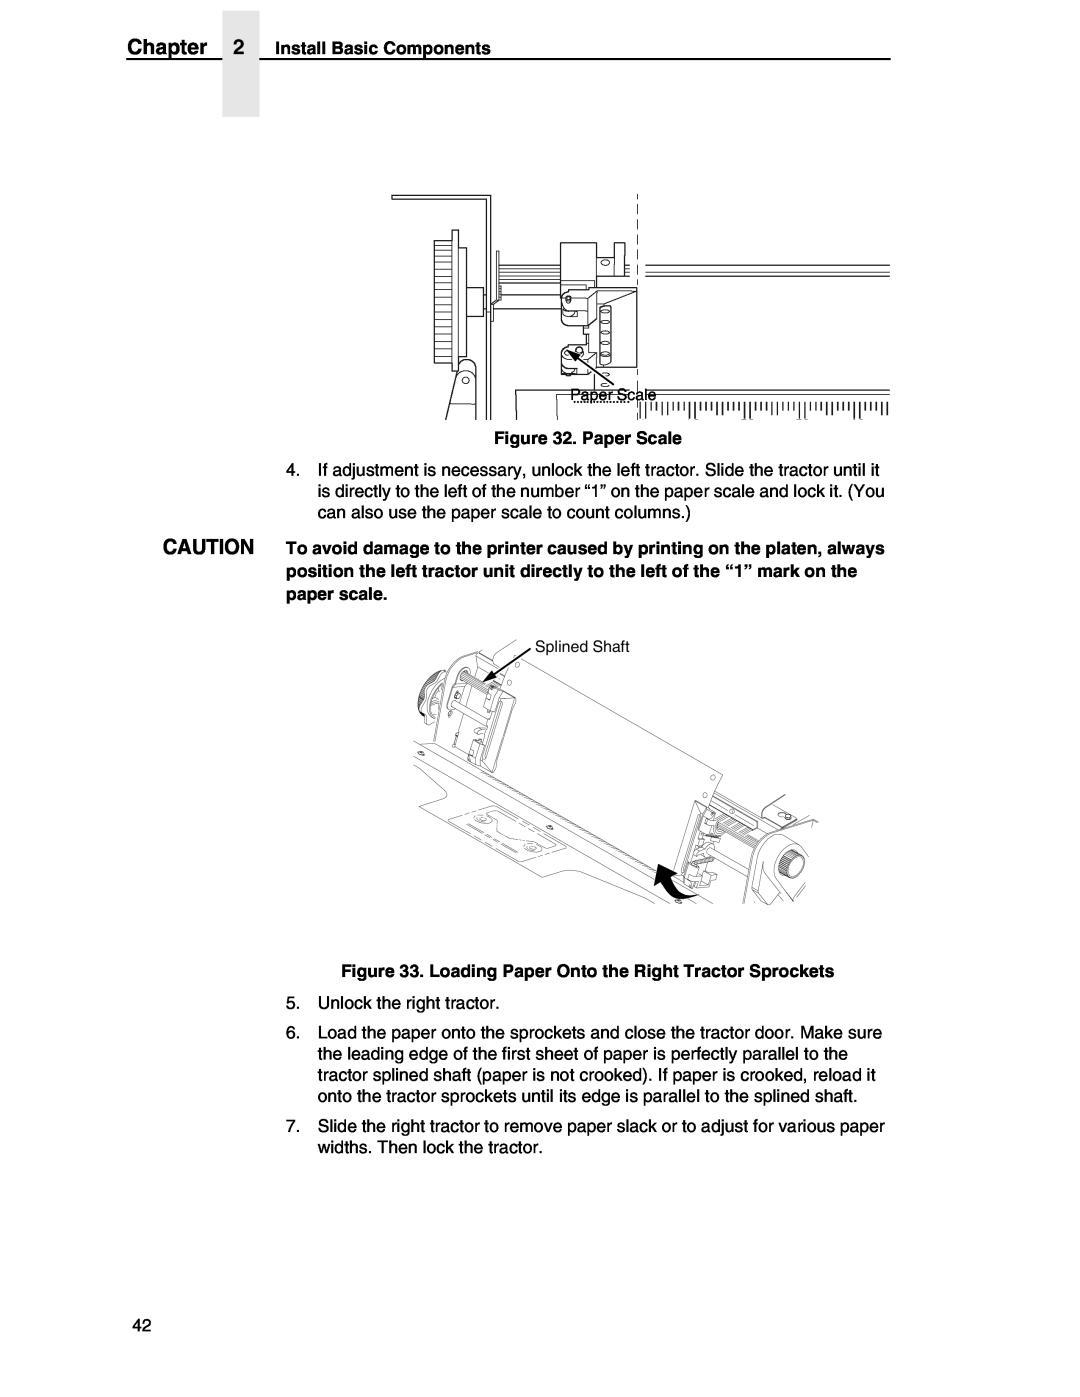 Compaq P5000 Series setup guide Paper Scale, Loading Paper Onto the Right Tractor Sprockets, Install Basic Components 